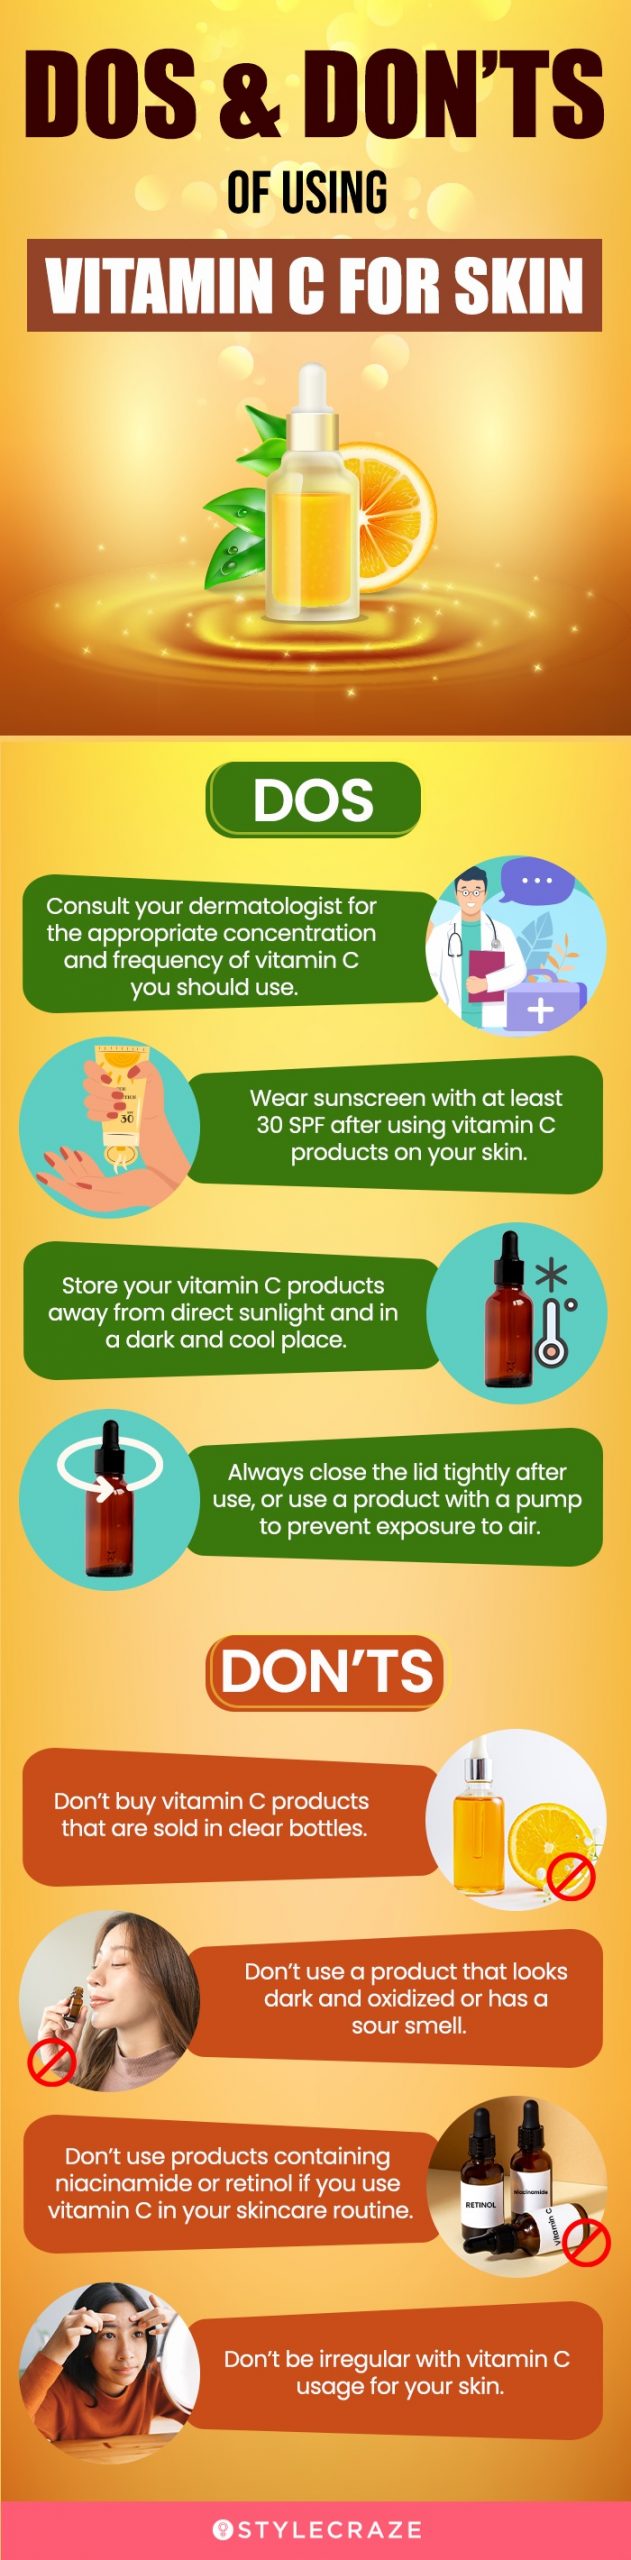 do’s and don'ts of using vitamin c for skin [infographic]